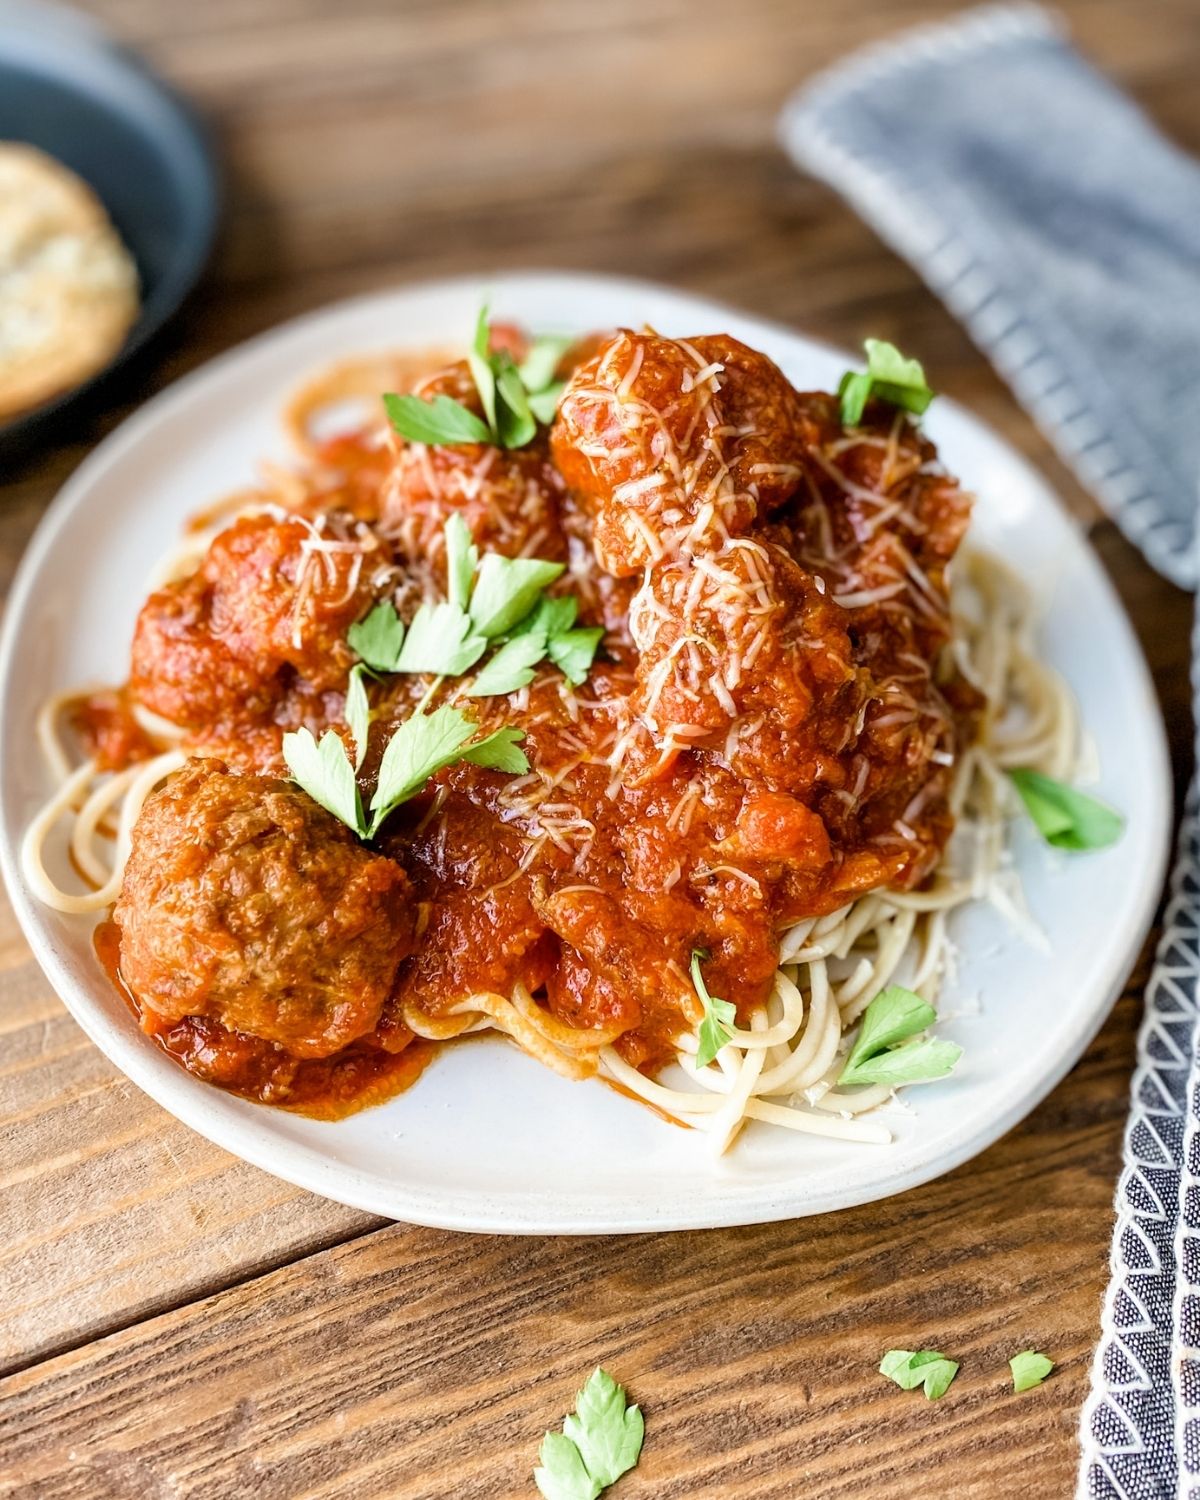 gluten-free meatballs on a plate with sauce and parsley.